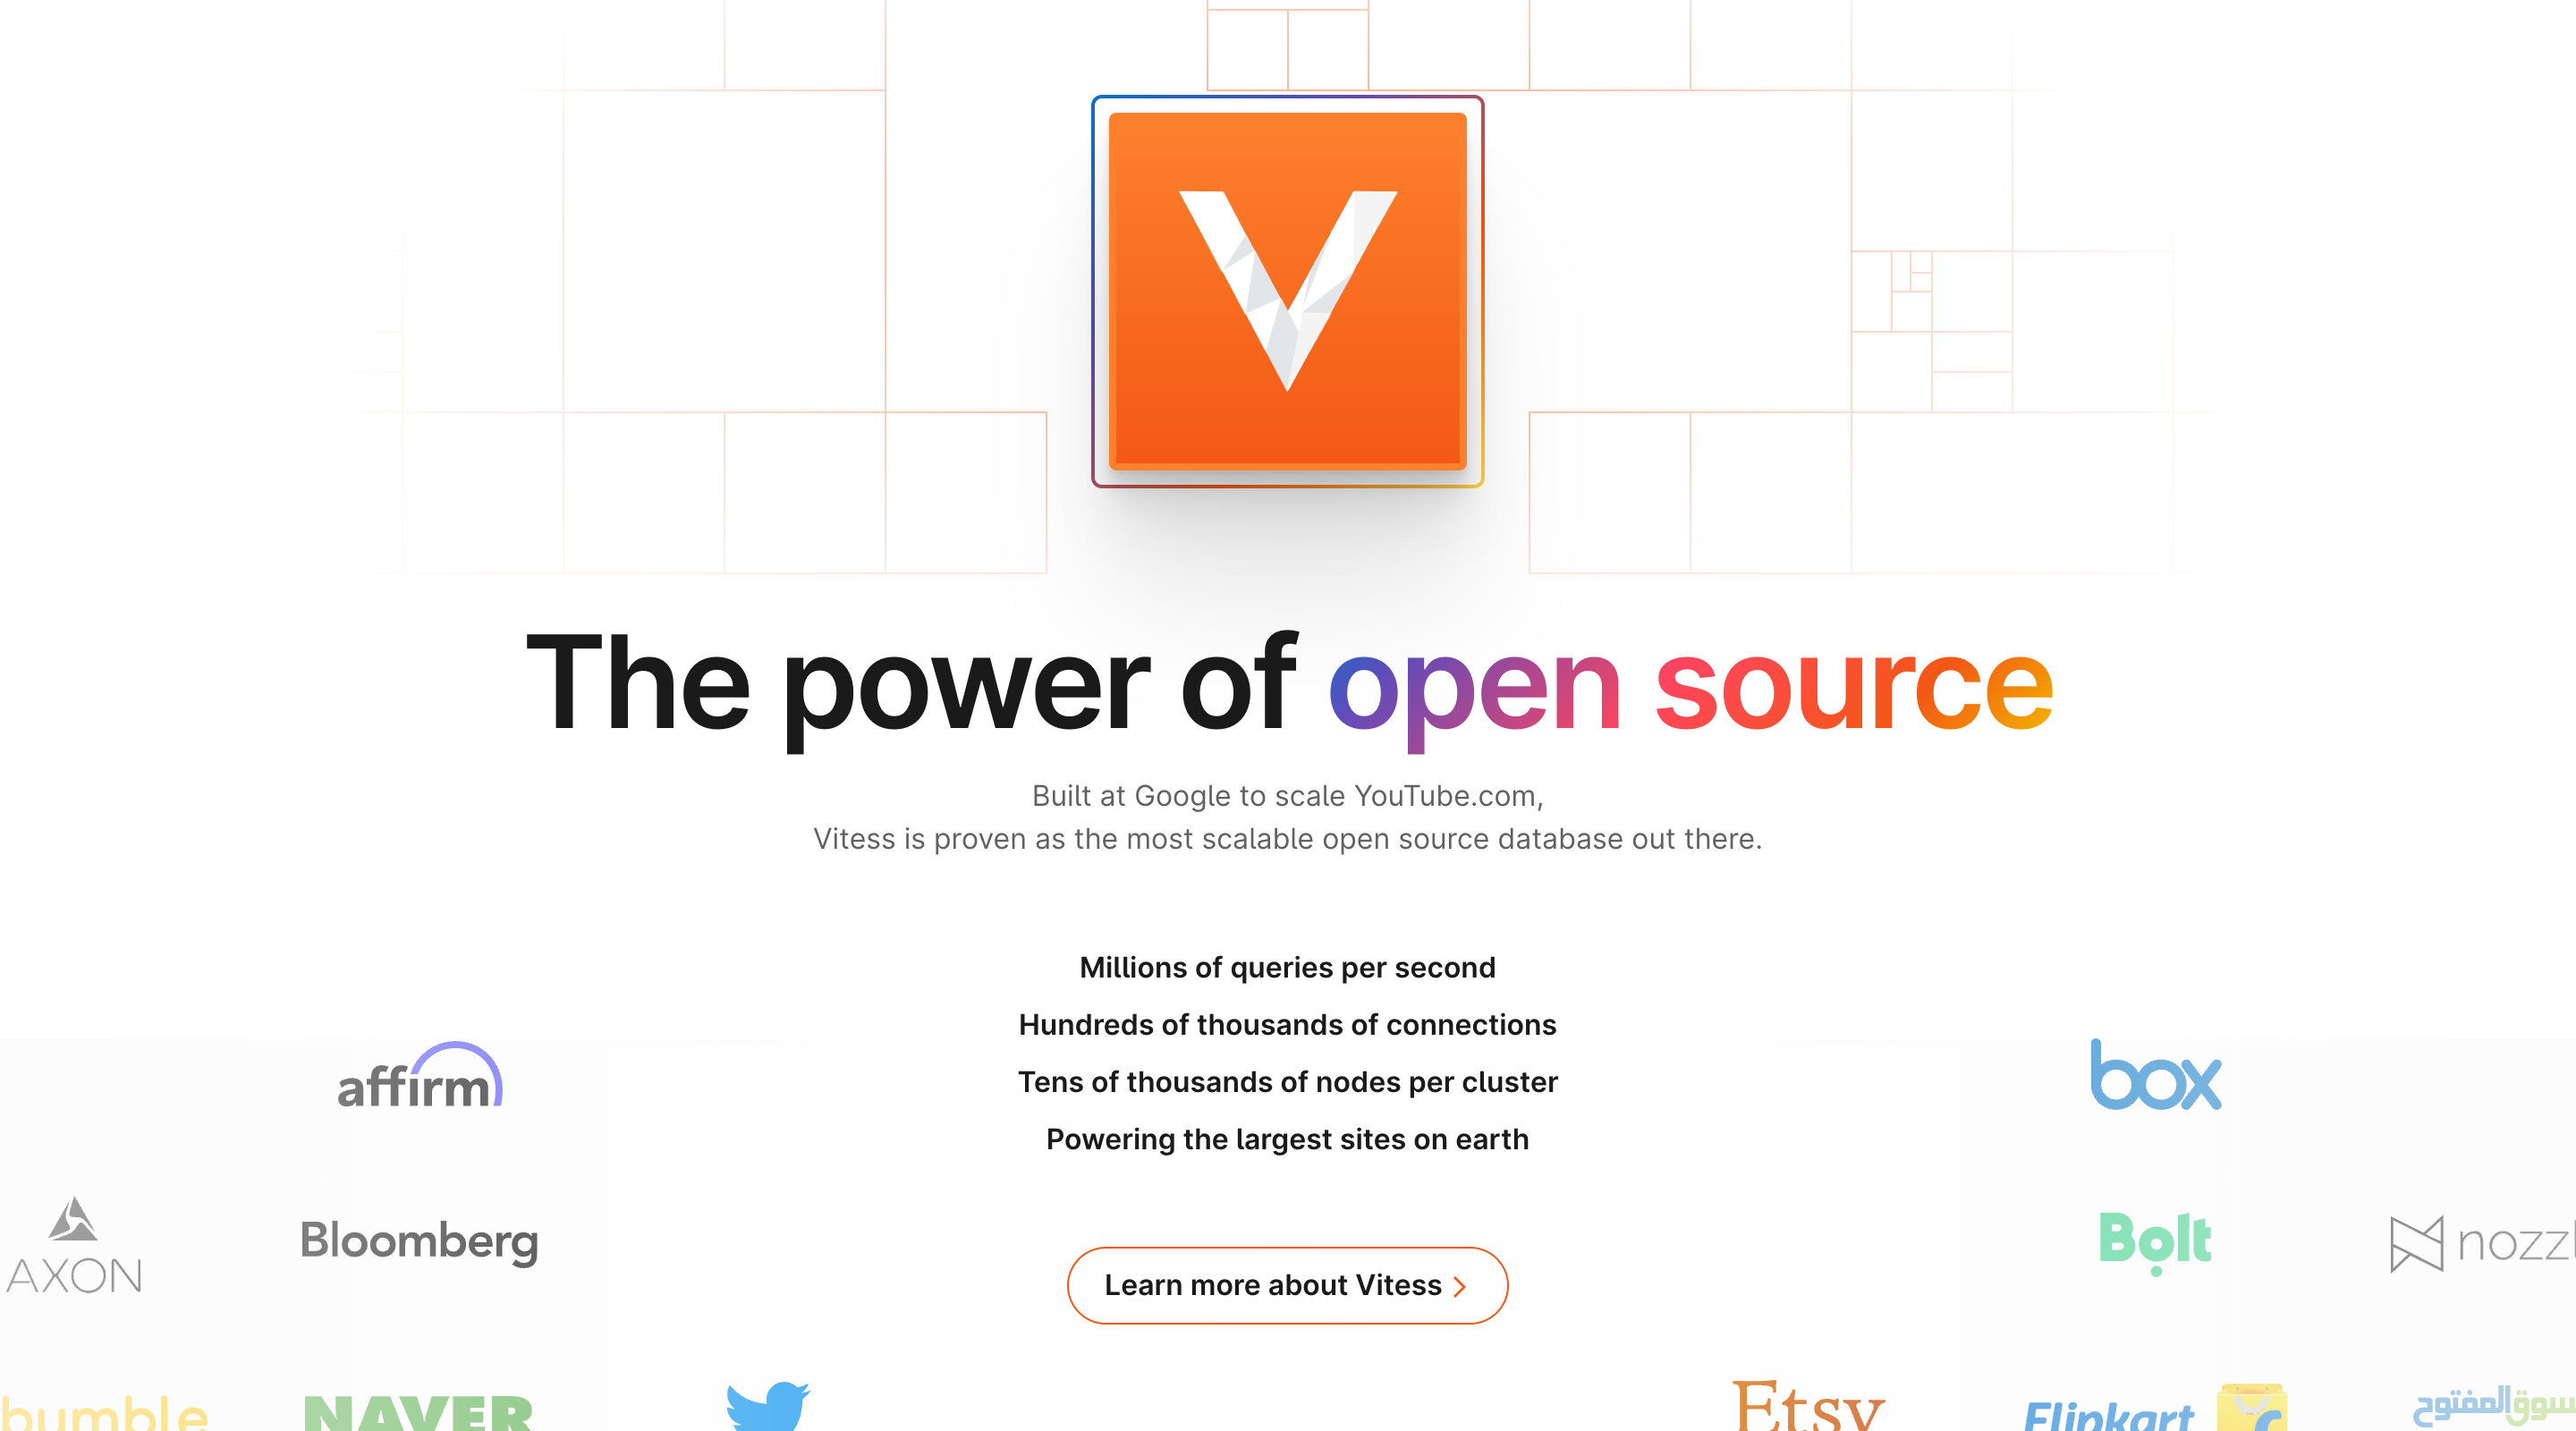 Screenshot of the PlanetScale website. The visible section has a large Vitess logo and a large title, 'The power of open source'. The section lists some features of Vitess and has a call-to-action labelled 'Learn more about Vitess'.